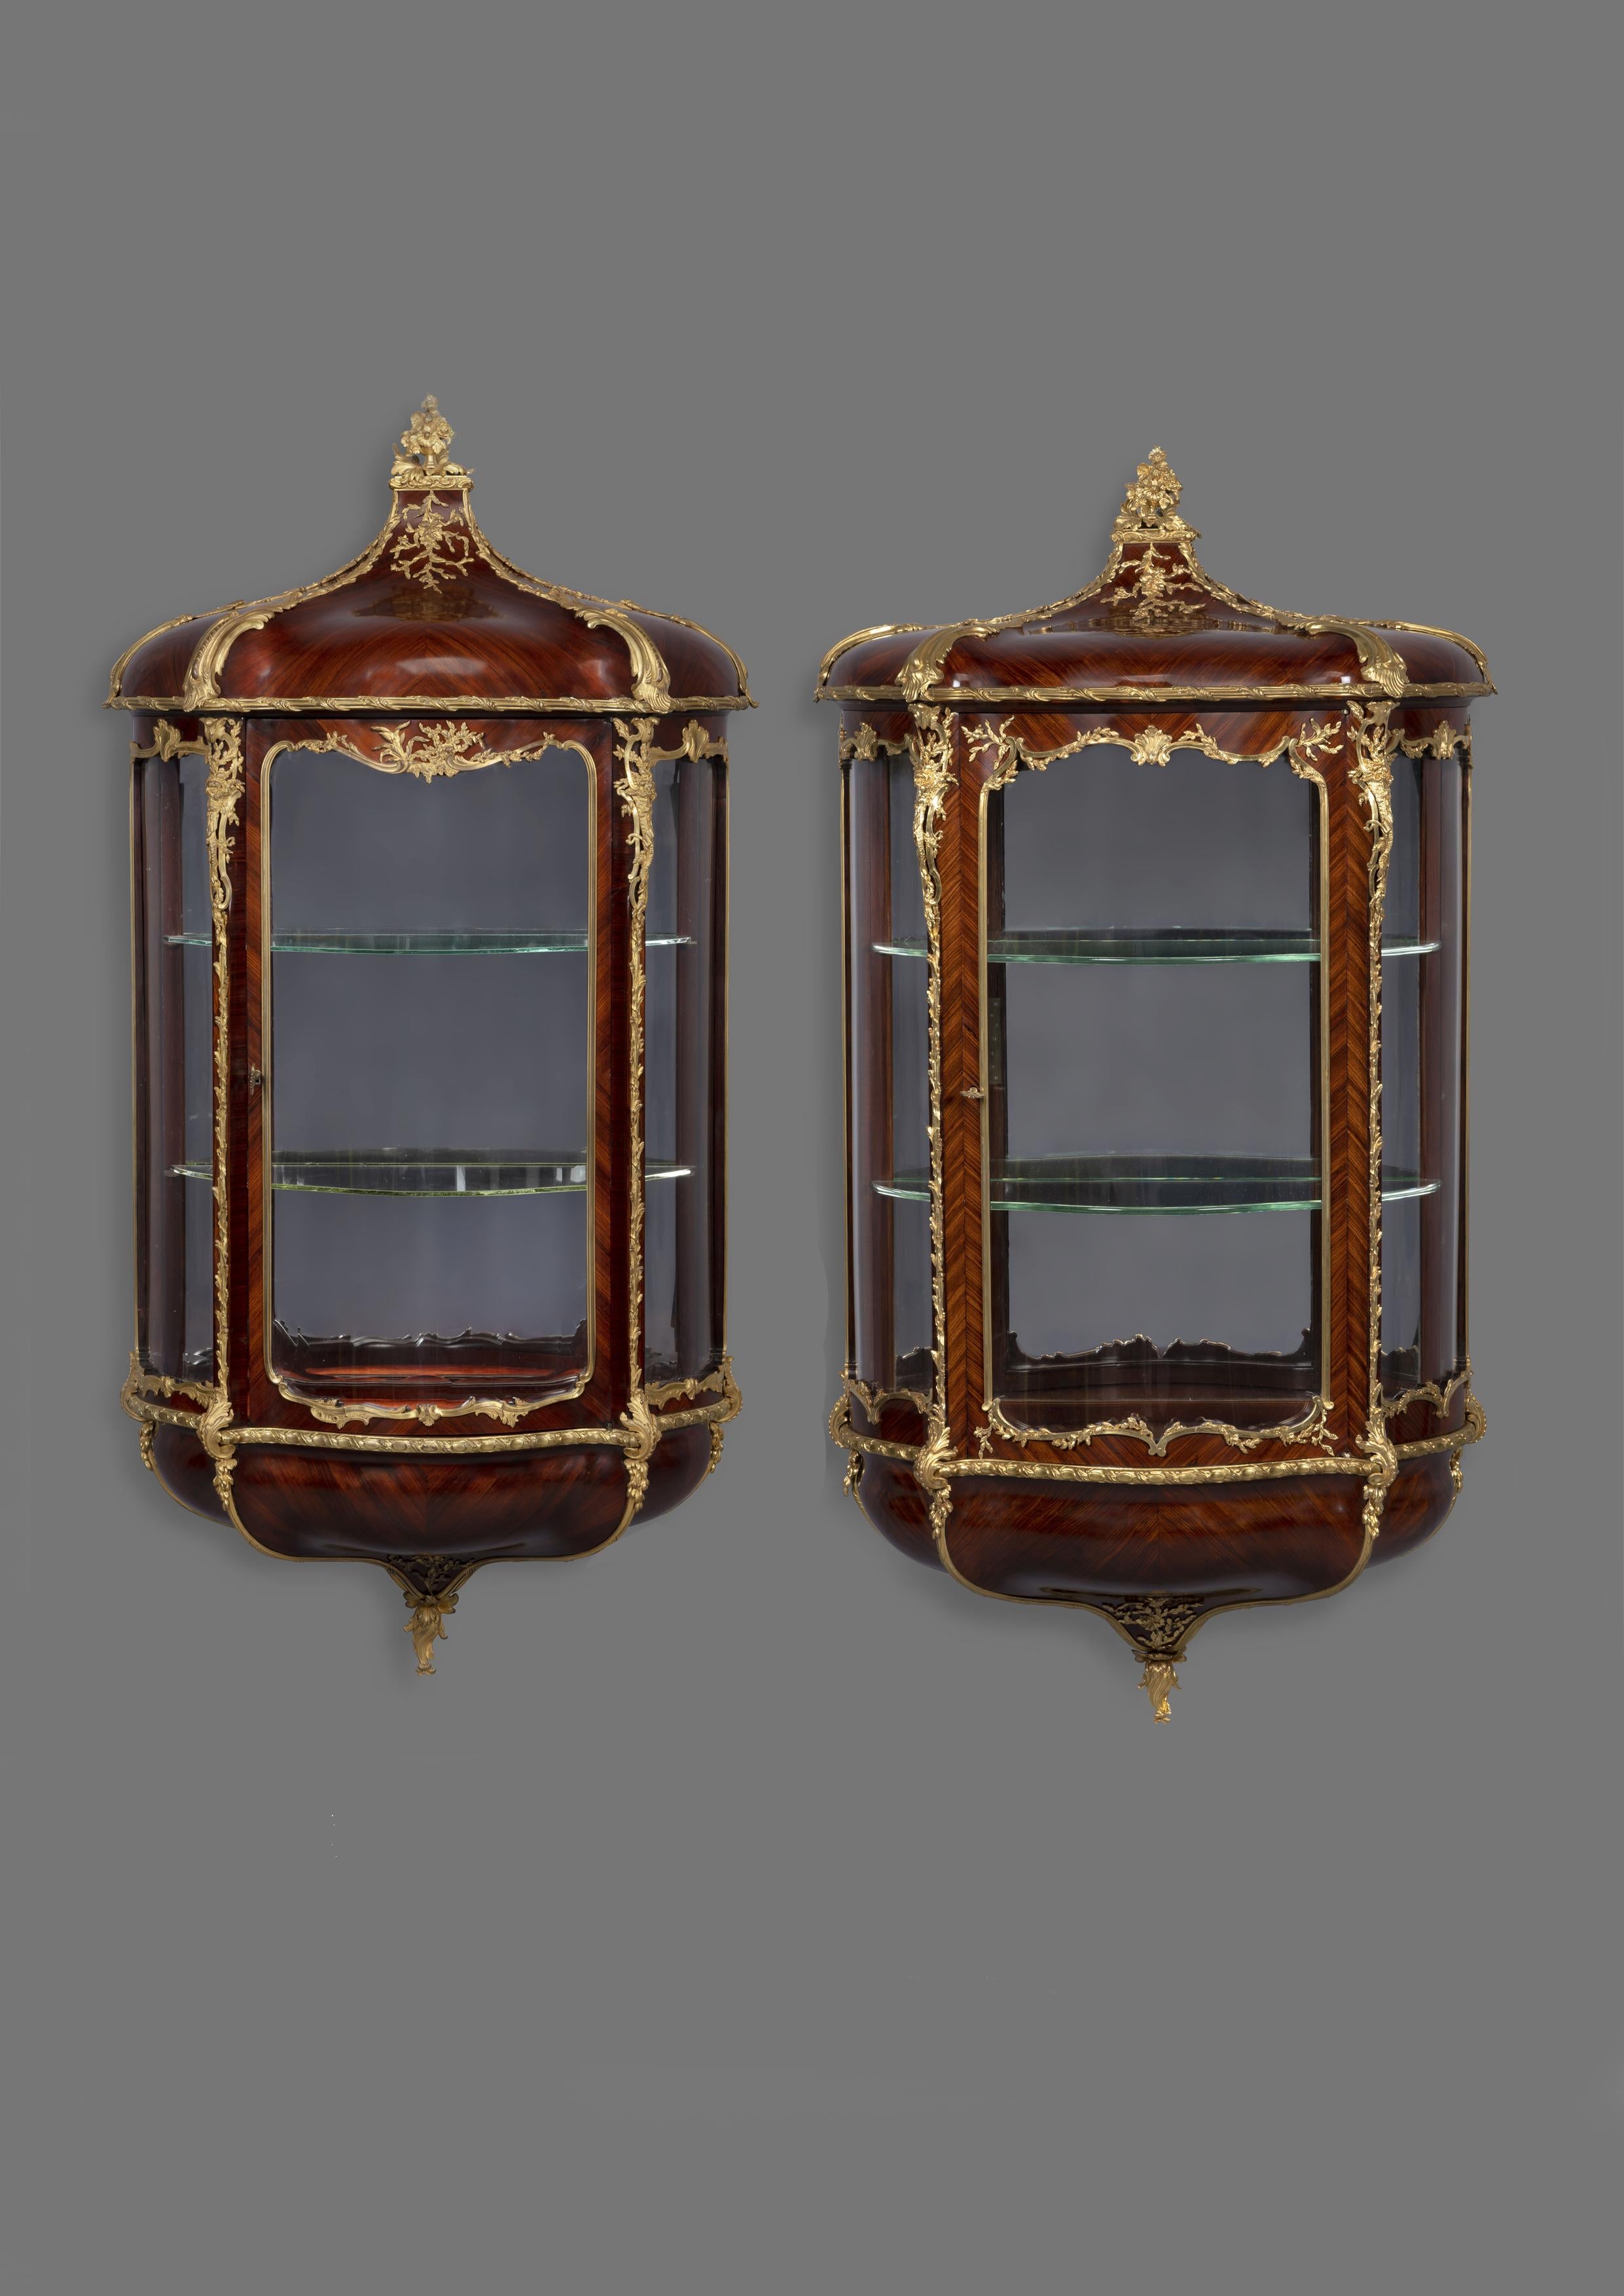 A rare and unusual matched pair of Louis XVI style gilt bronze-mounted wall vitrines by Joseph-Emmanuel Zwiener. 

French, circa 1890.

Signed ‘E. Zwiener’ to the base of the bronze mount to one door. The reverse of the bronze mounts stamped